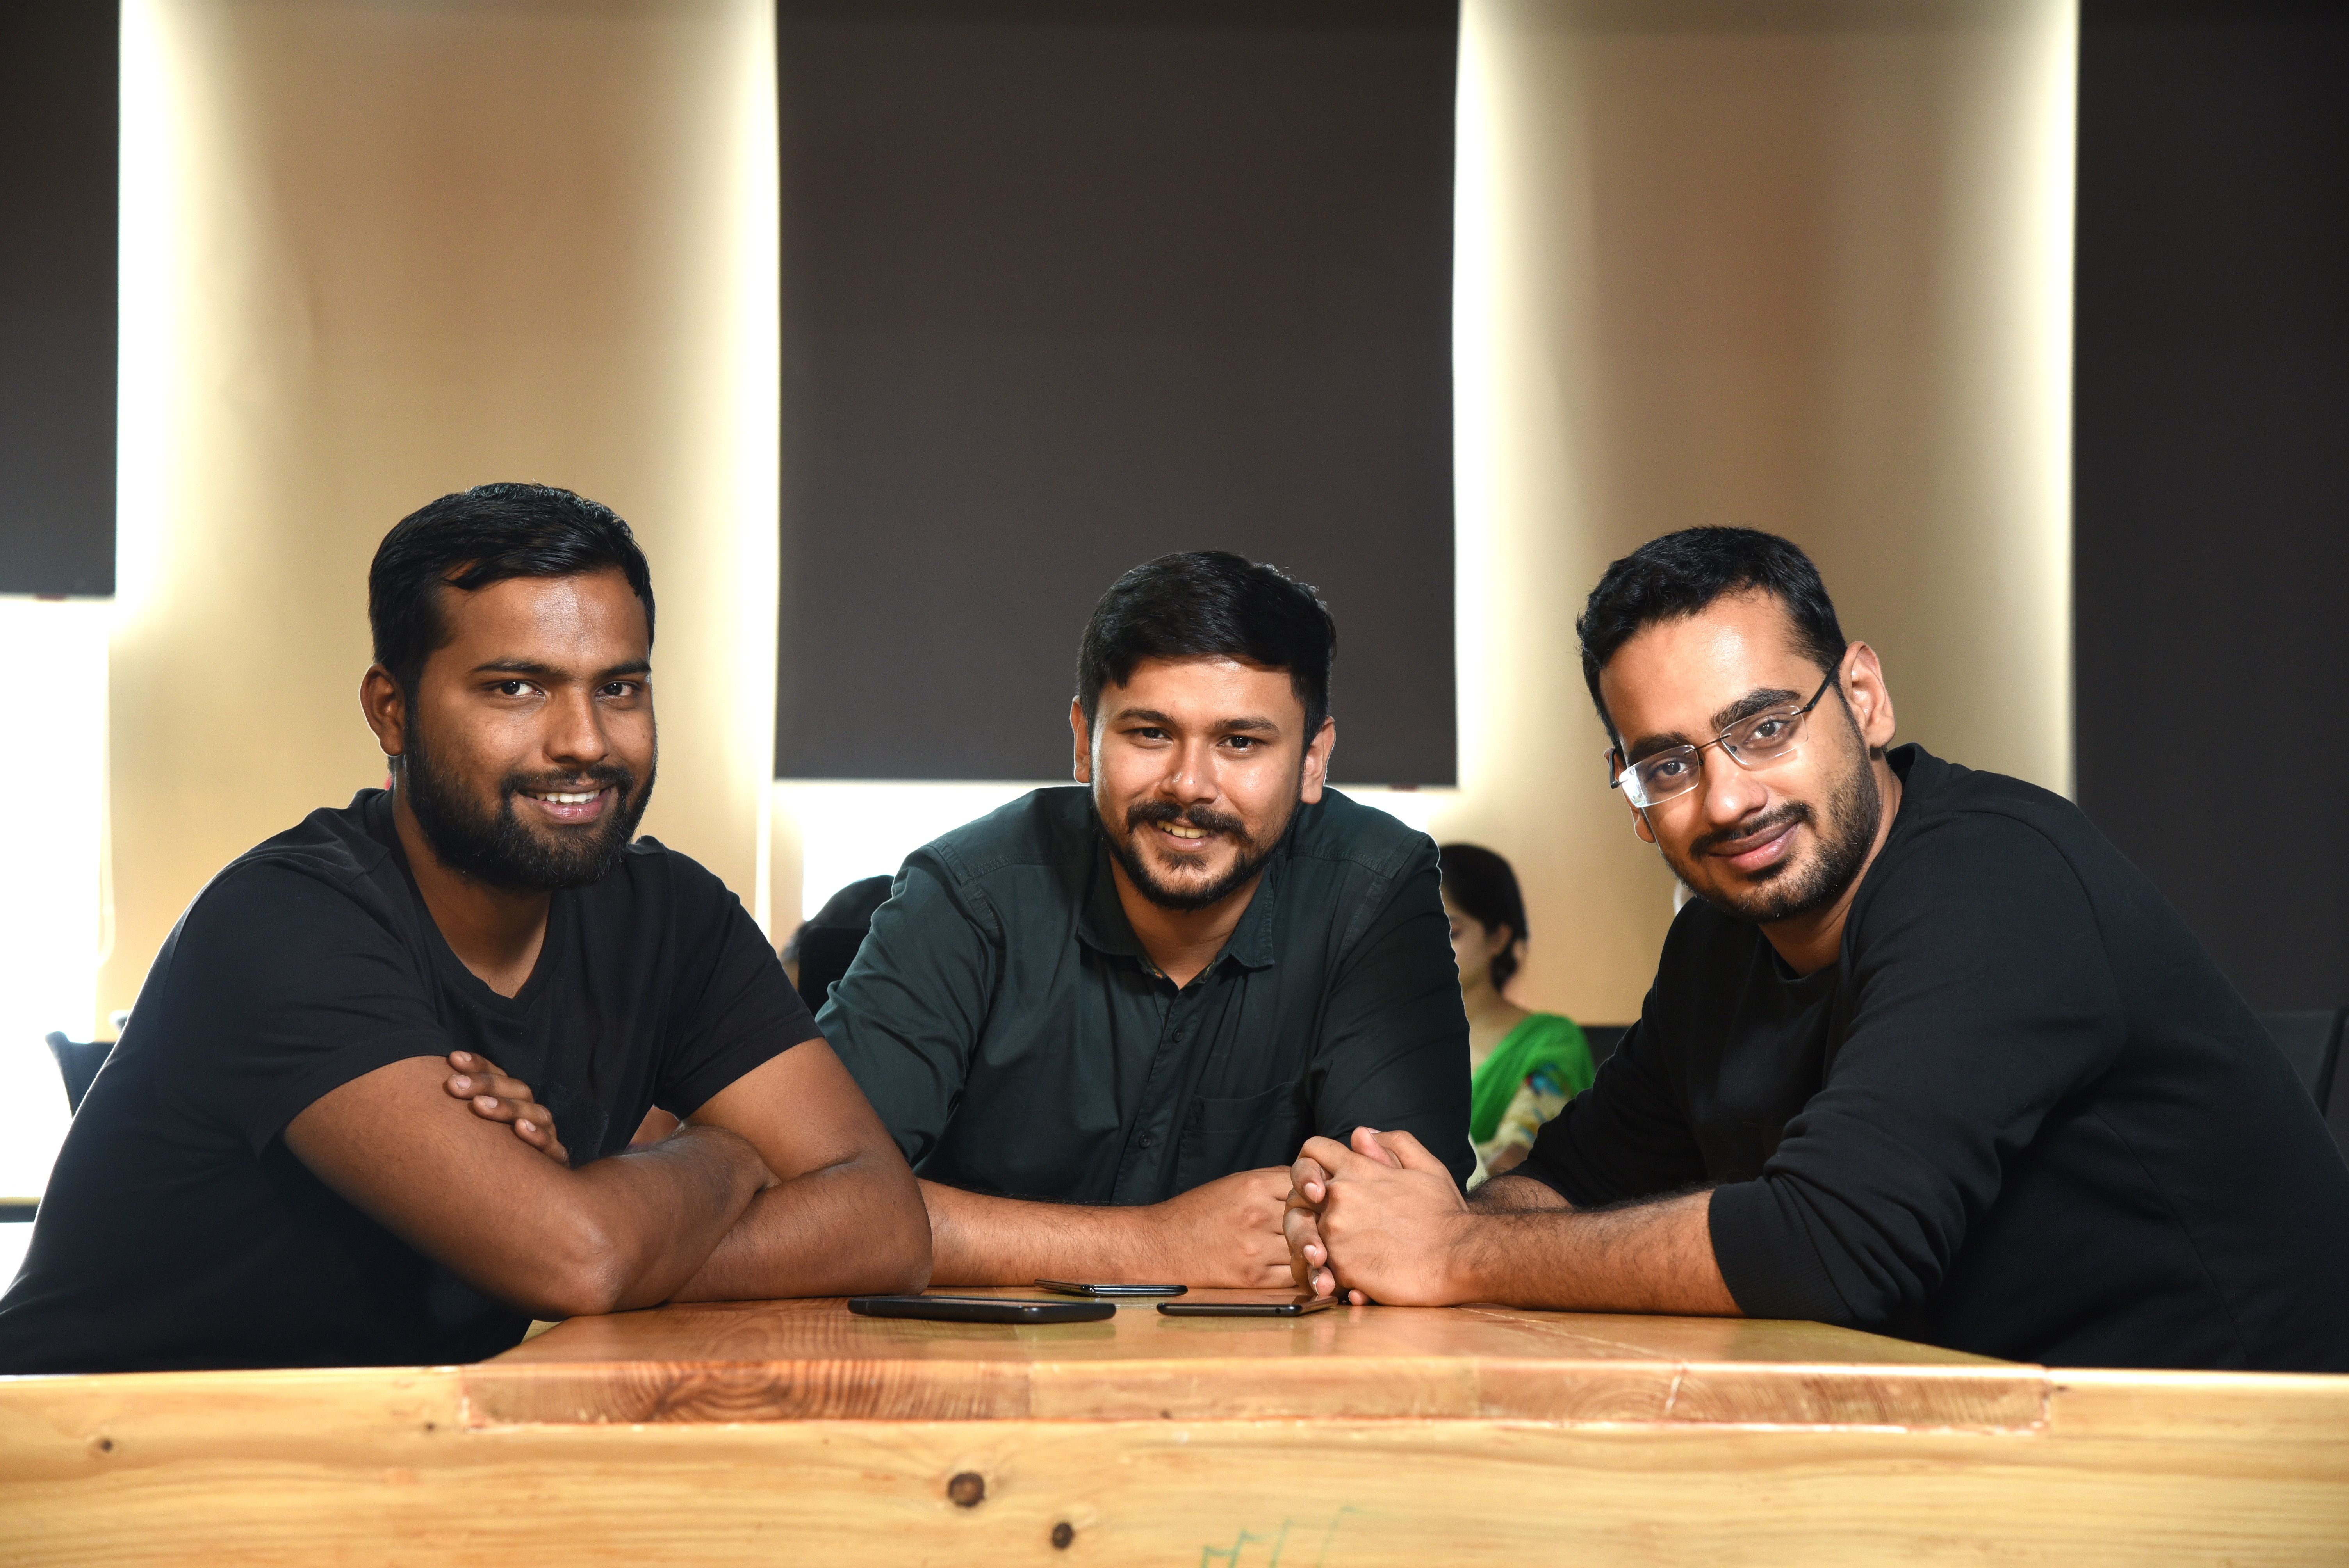 Sharechat Founders